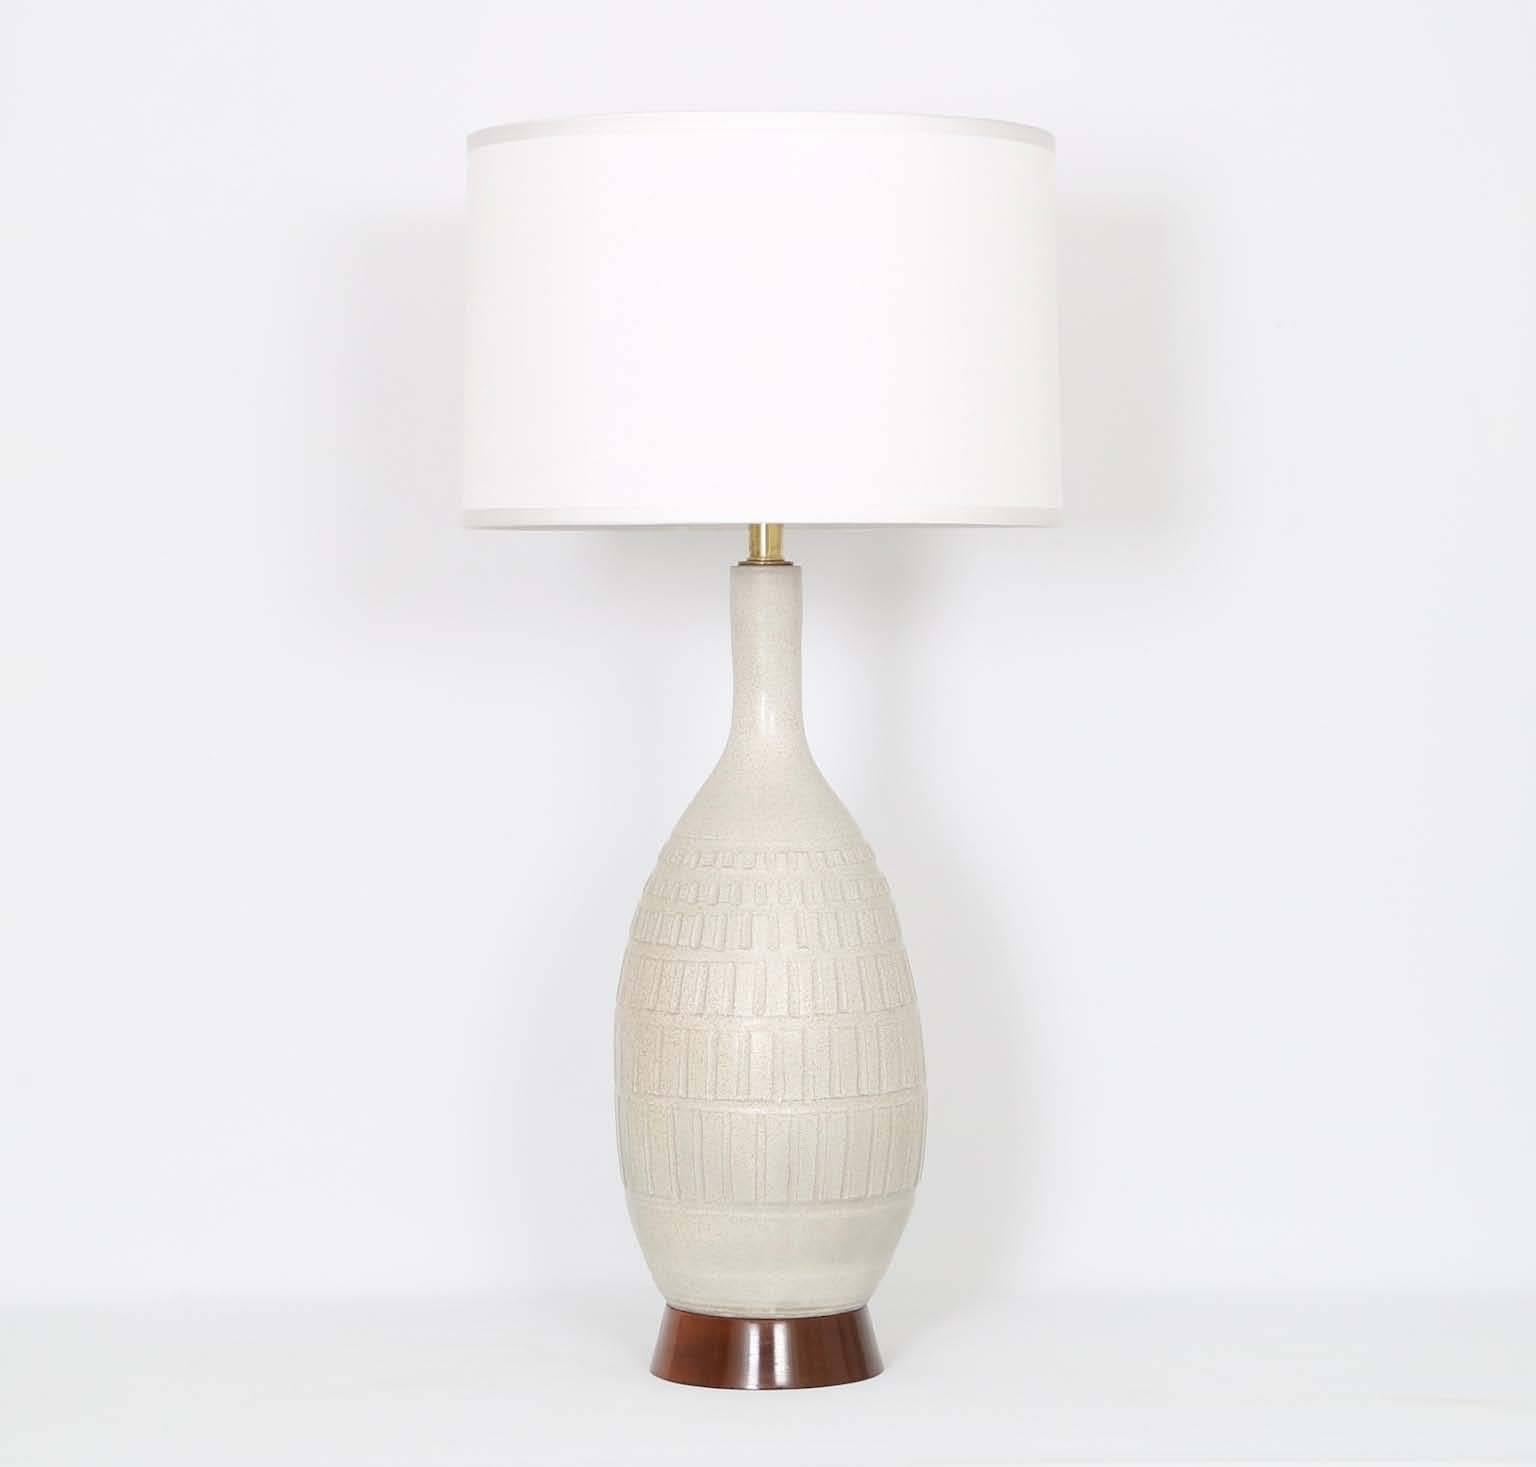 A tall and sculptural studio pottery table lamp by Bob Kinzie, produced, circa 1960s for his company Affiliated craftsmen of California. The earthenware clay body, with an abstract incised design, comes mounted on a solid walnut base. The noted